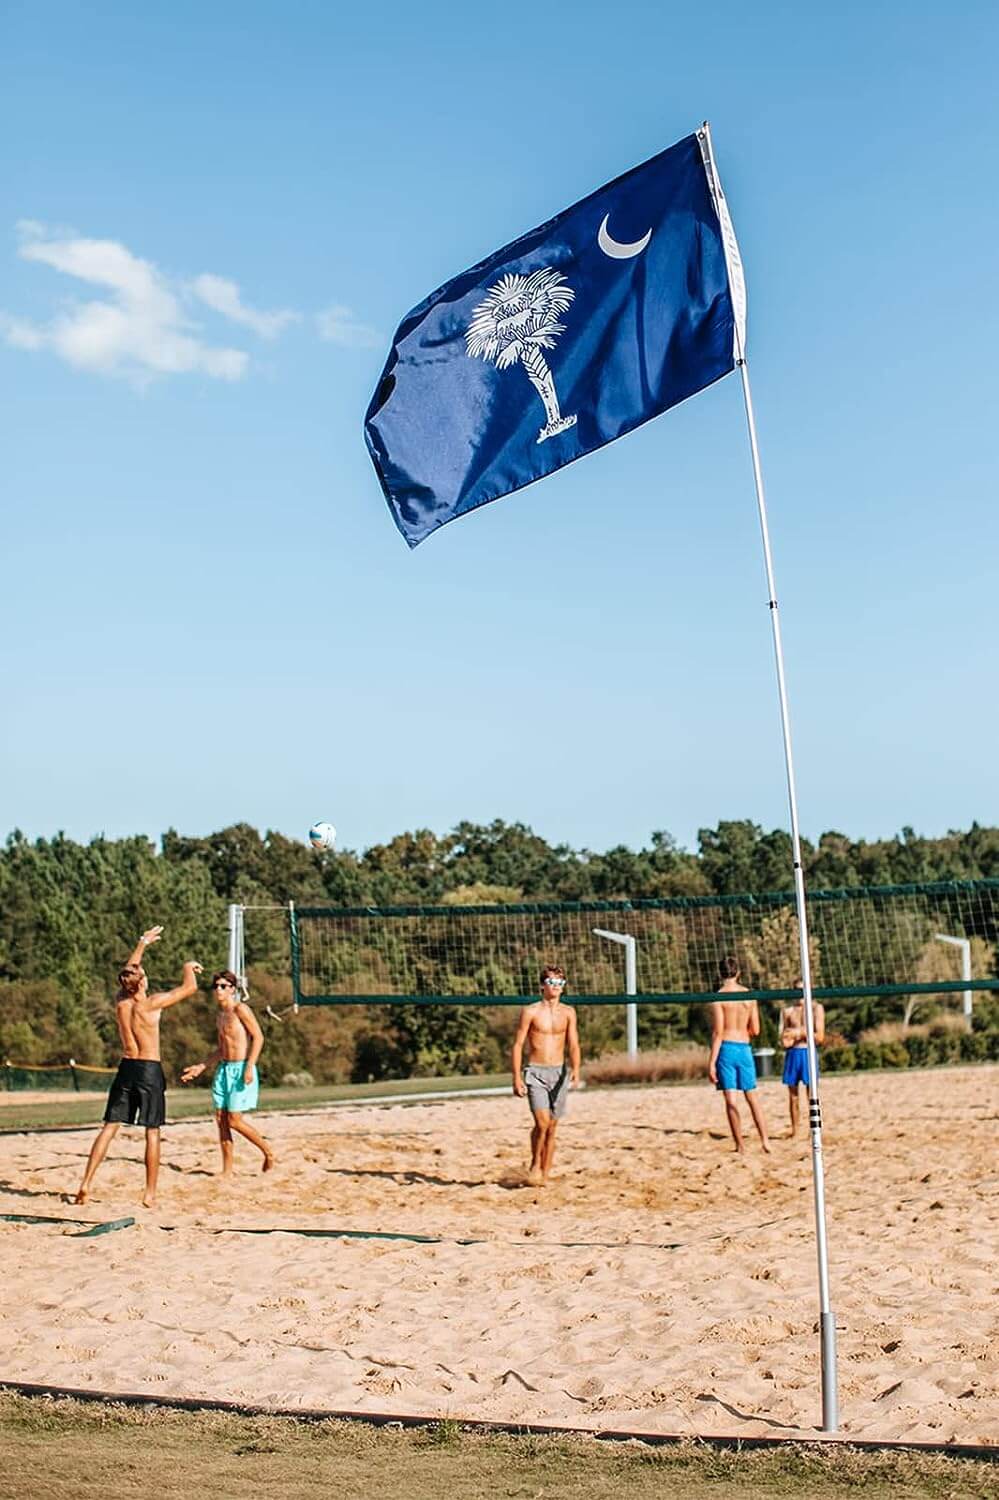 flag pole flying south carolina flag at beach volleyball game